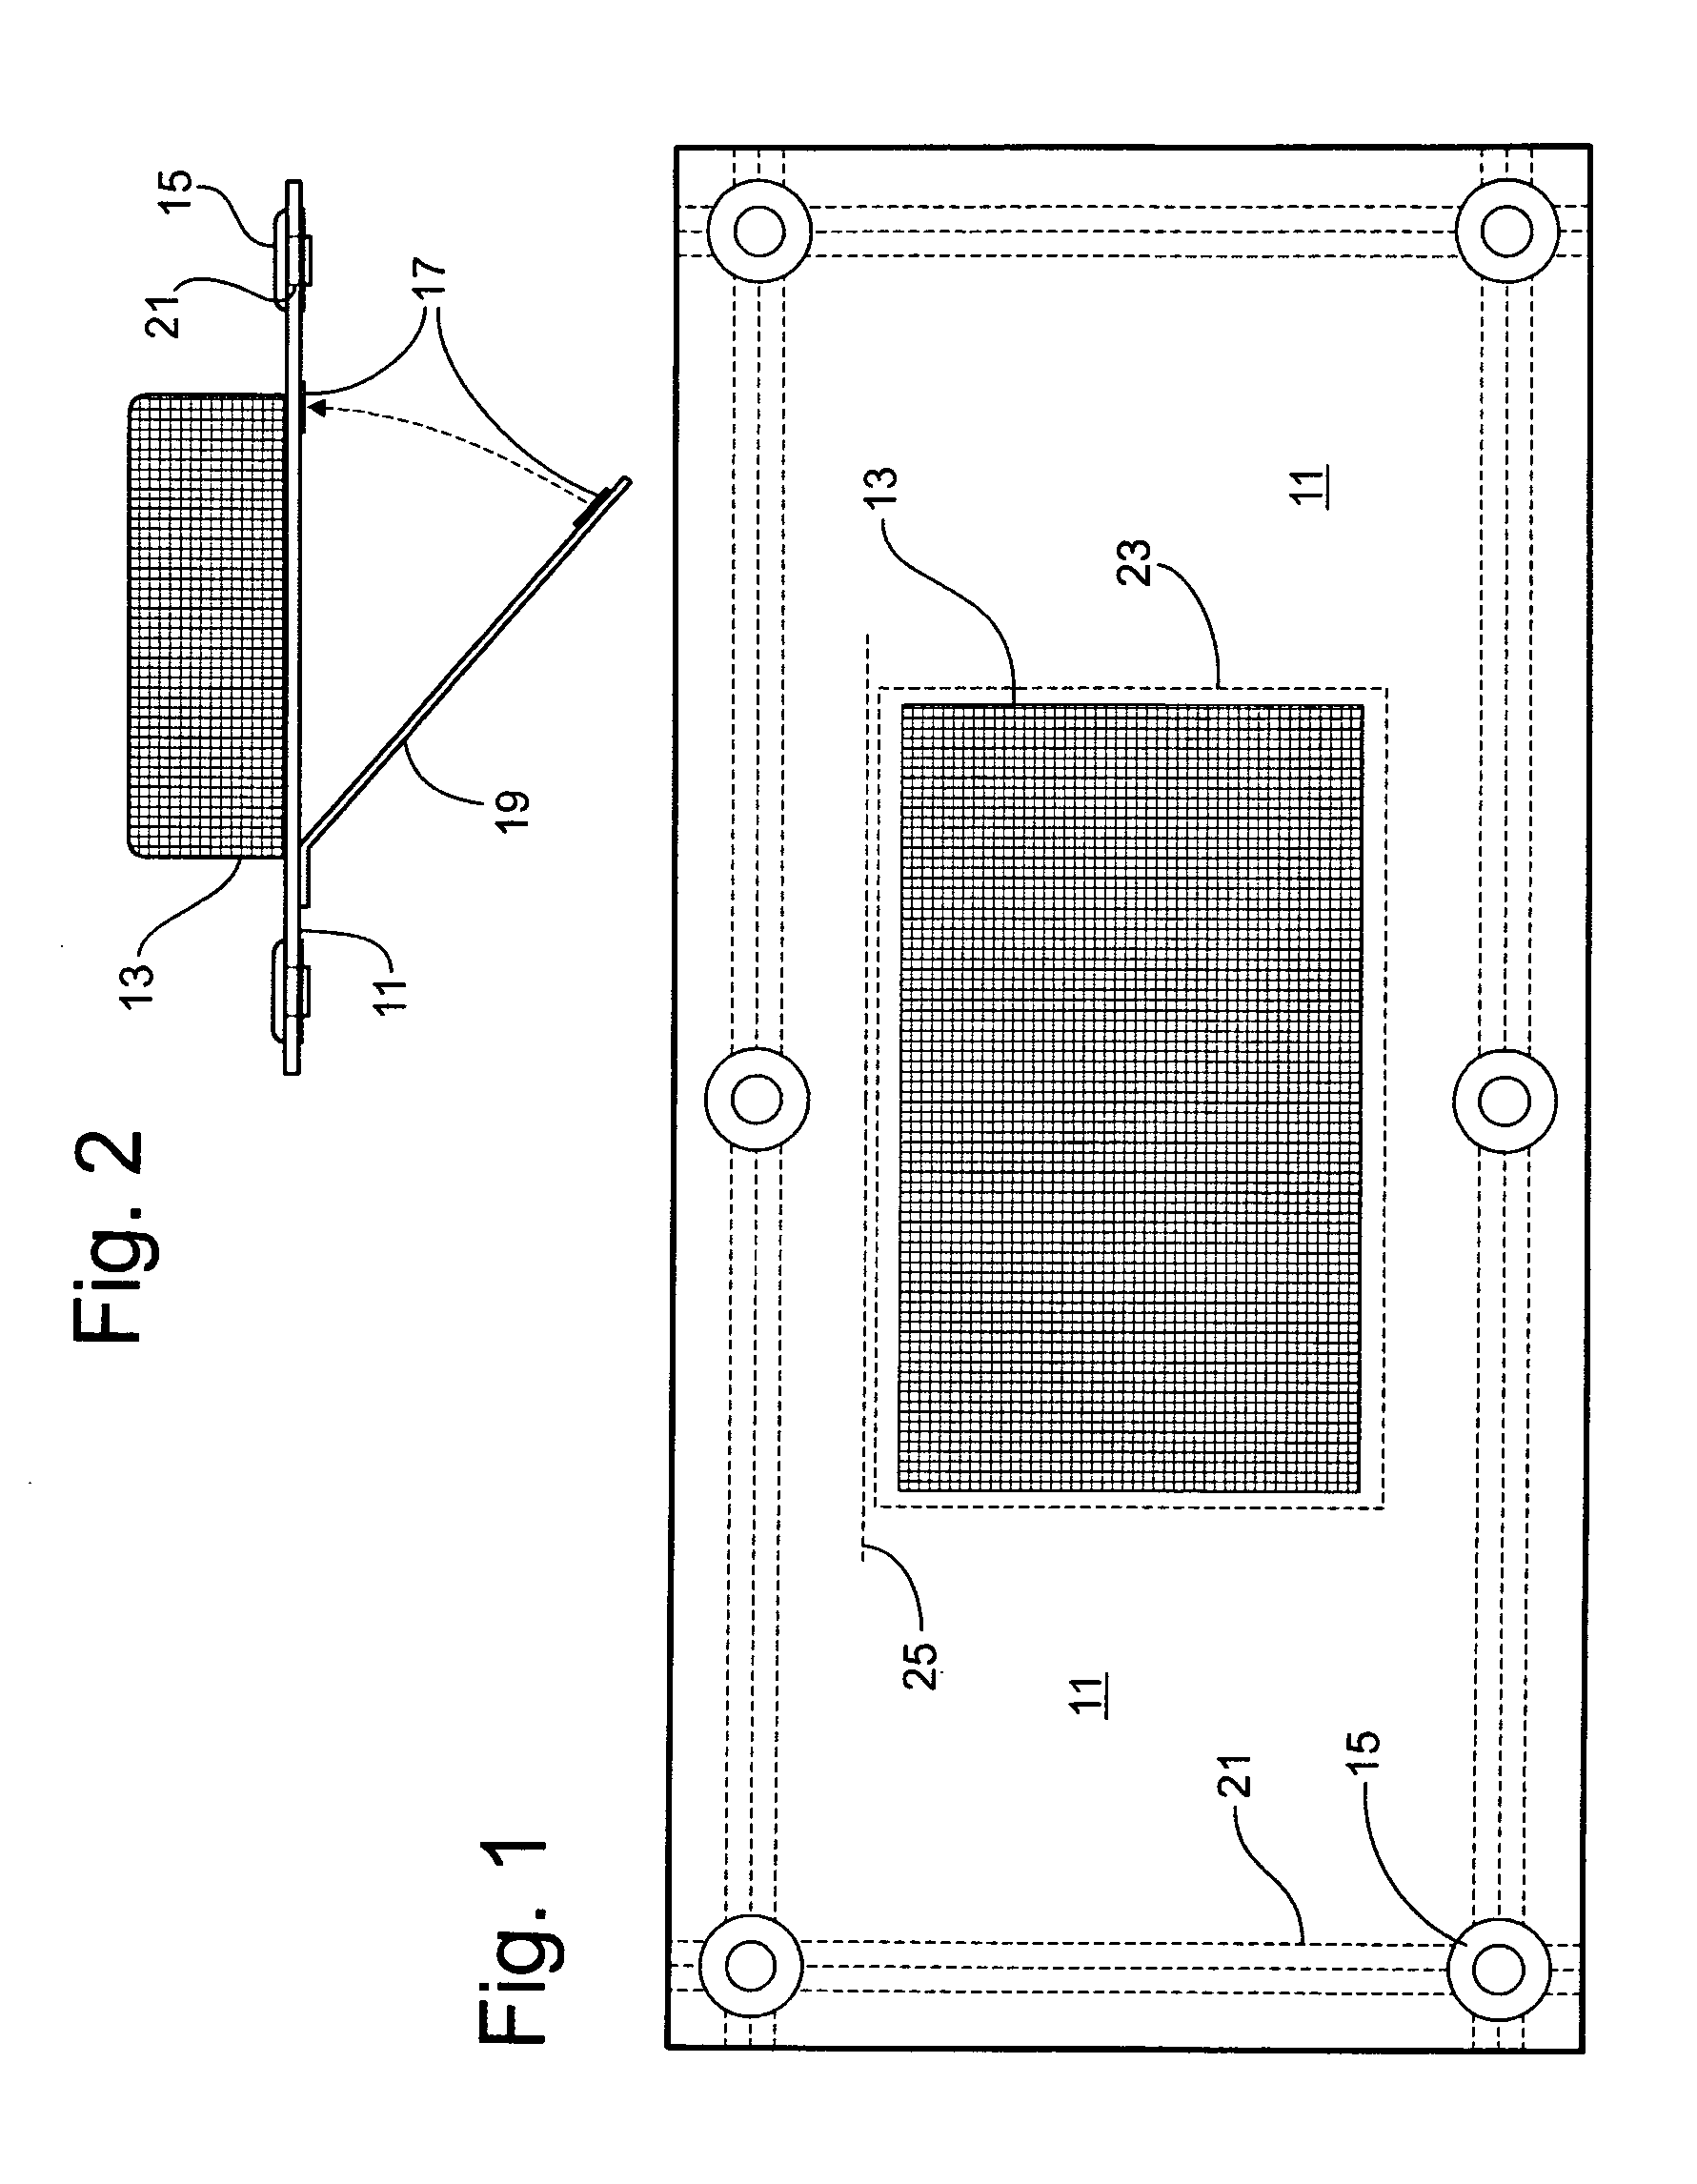 Load safety marker light mounting device